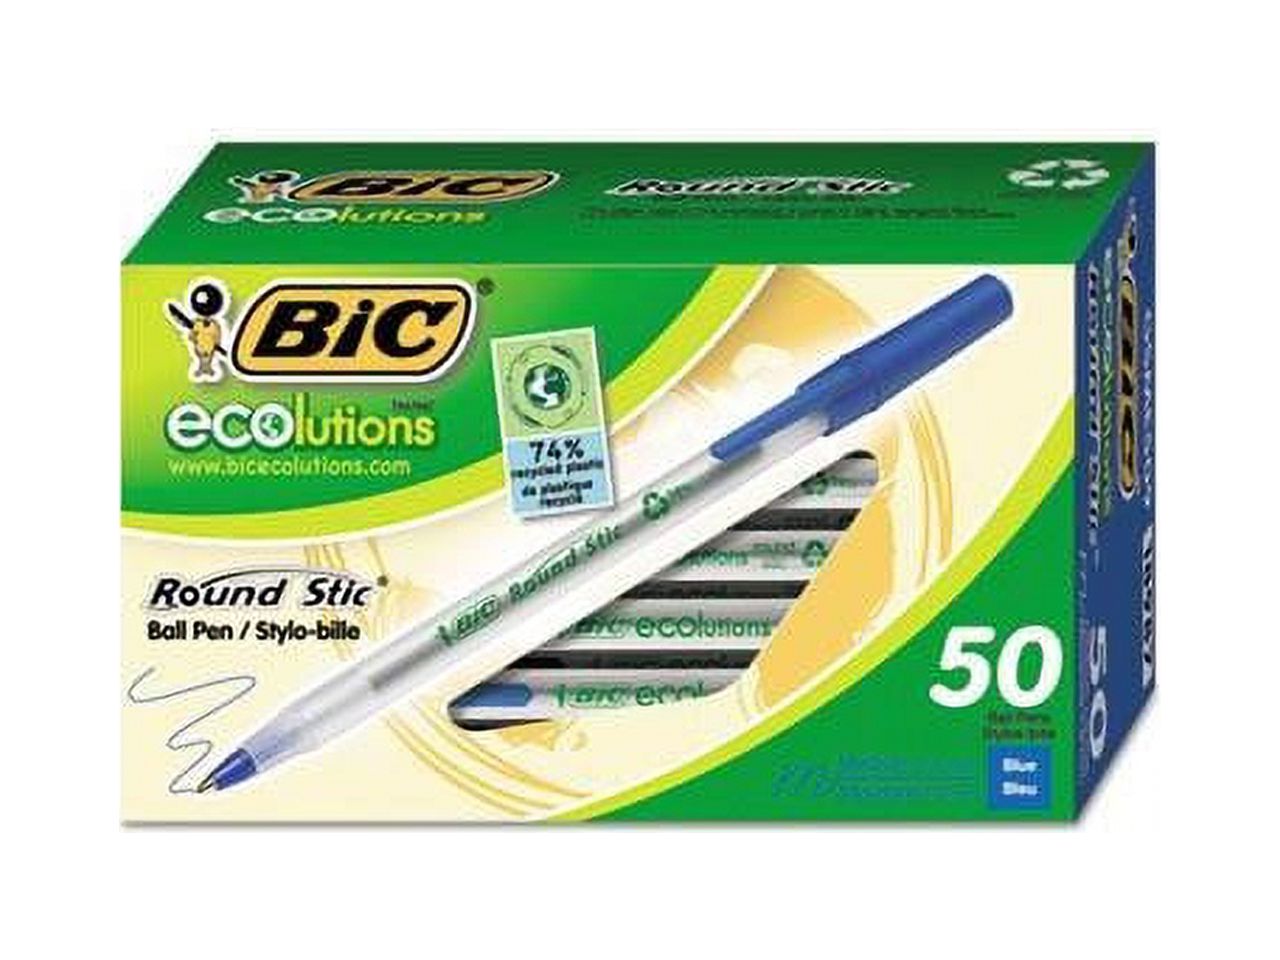 BIC Ecolutions Round Stic Ball Pen, Medium Point, Blue, 50-Count - image 1 of 8